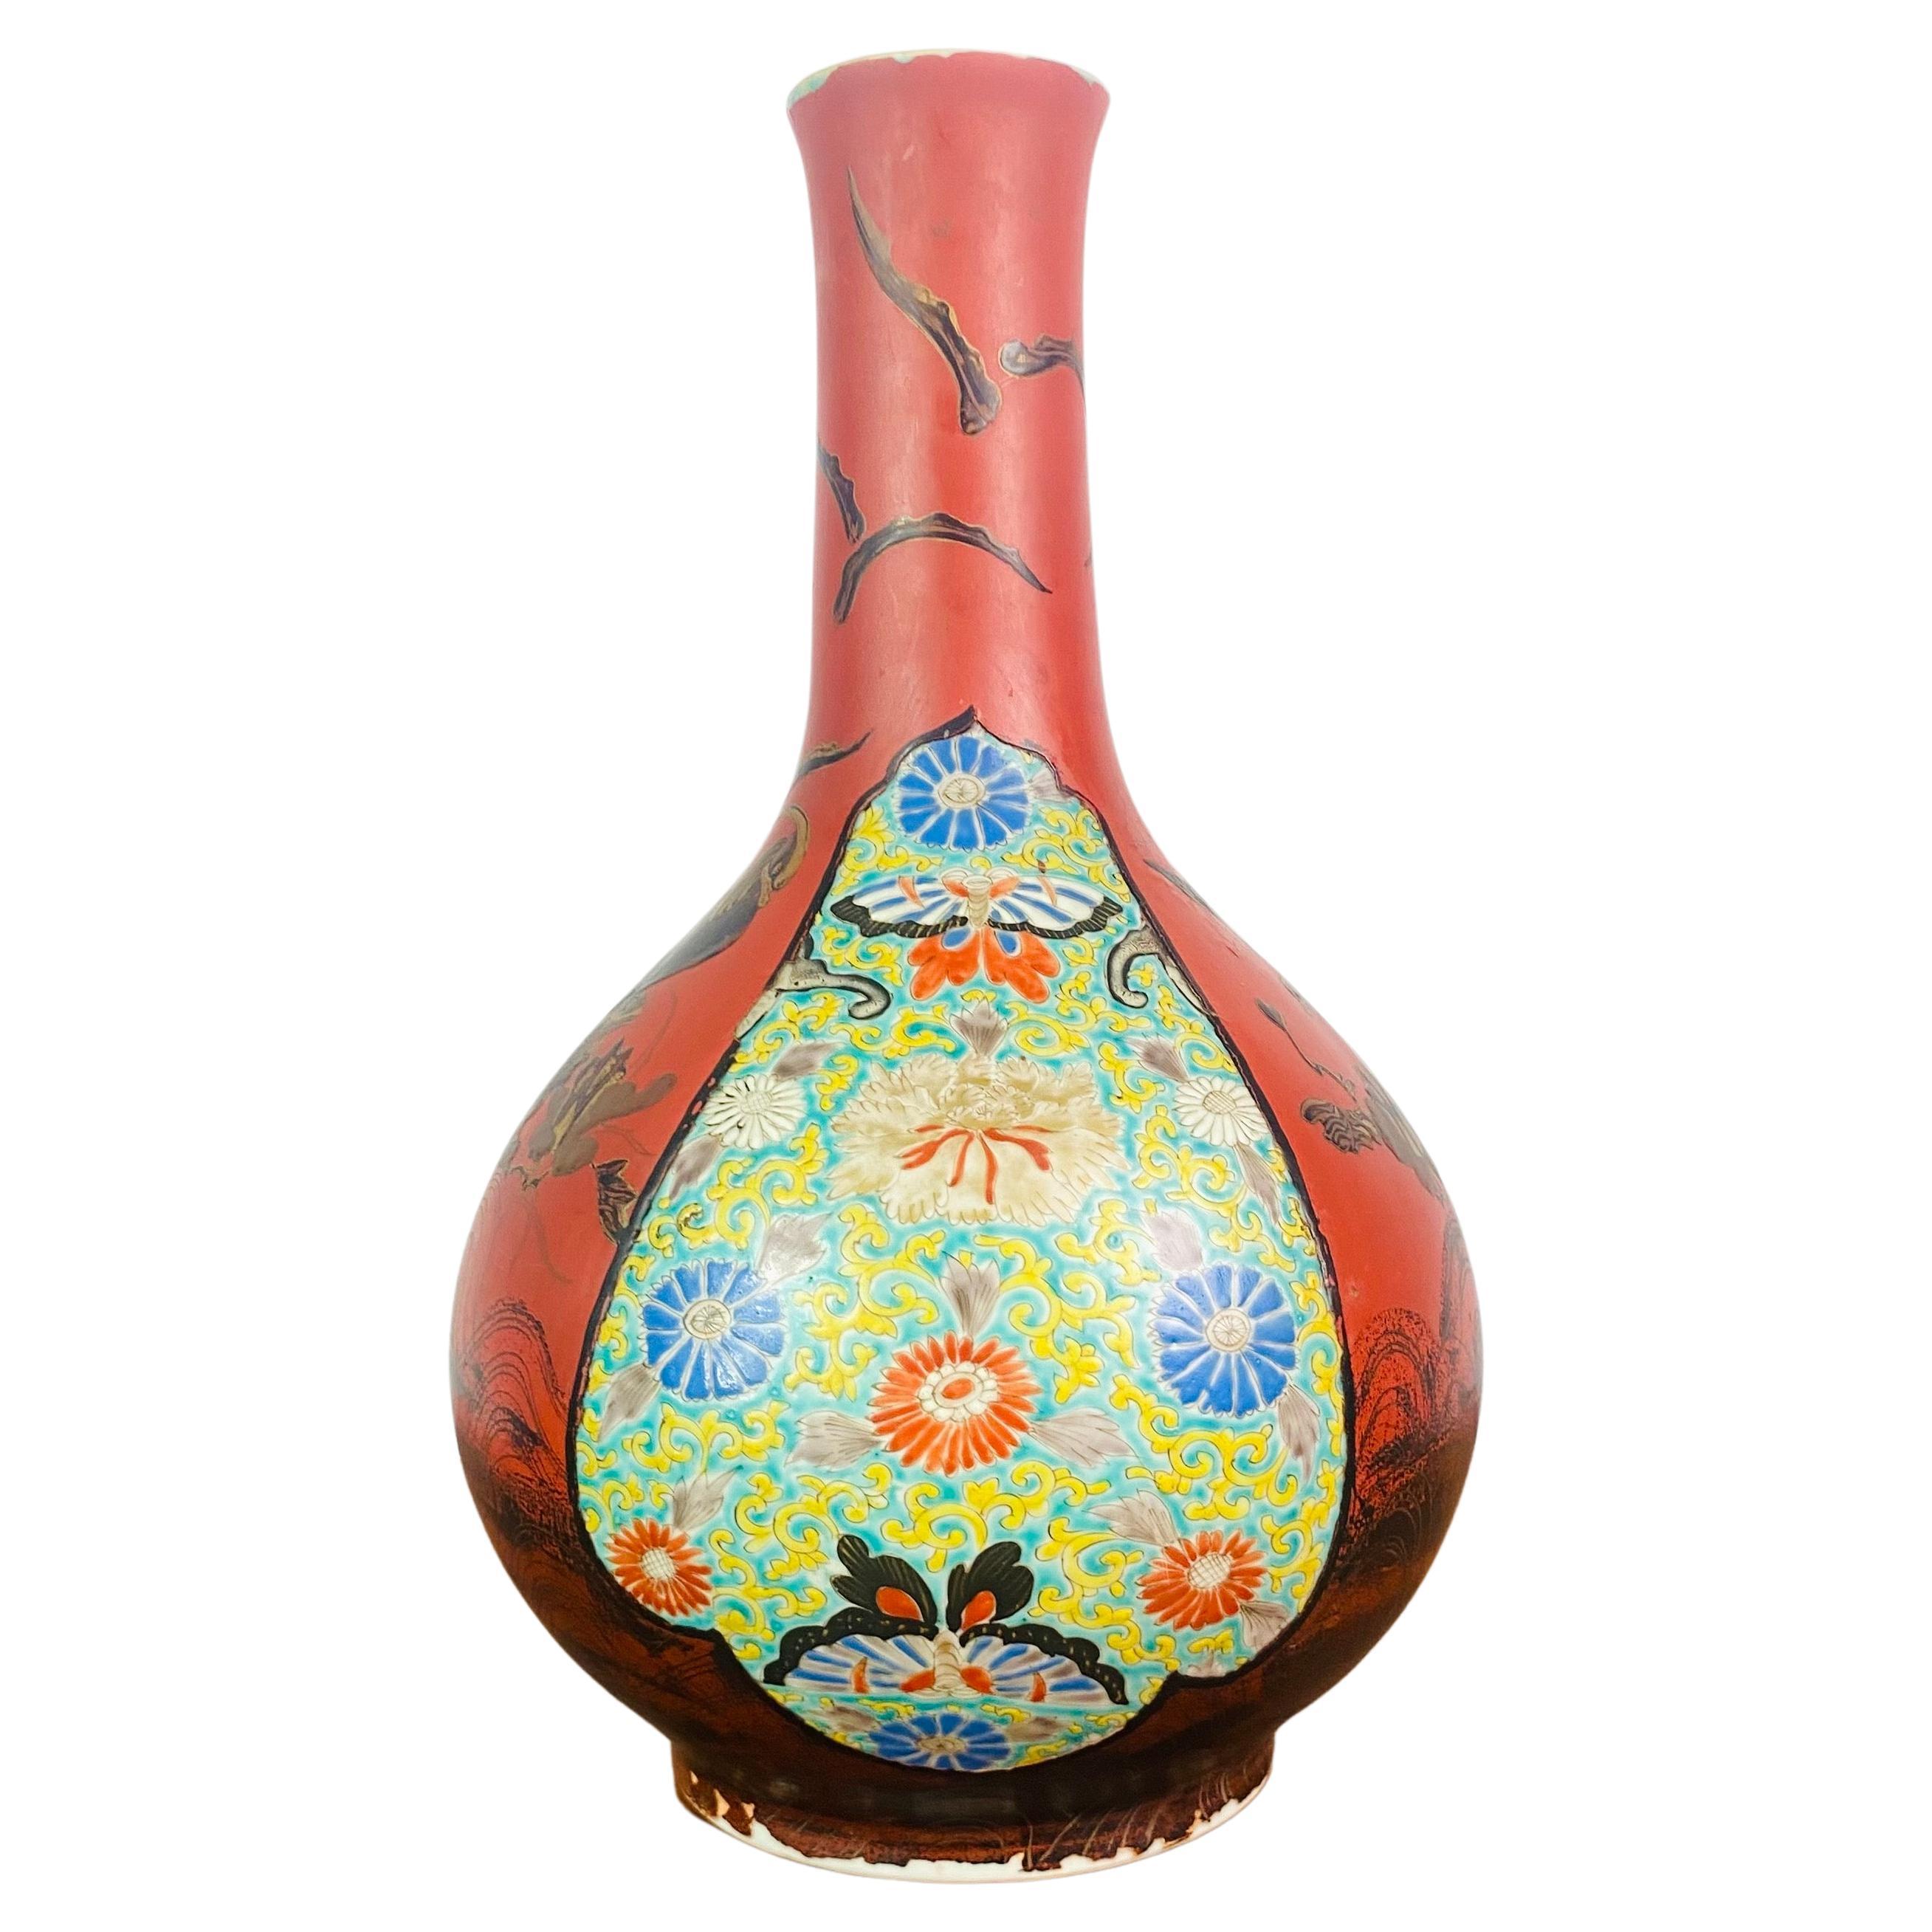 Very pretty Japanese porcelain vase enhanced with lacquer.
This beautiful vase with a swollen body, called Tianqiuping, is decorated extensively with a thousand flowers in reserve in brick-colored lacquered surrounds decorated with birds.
This